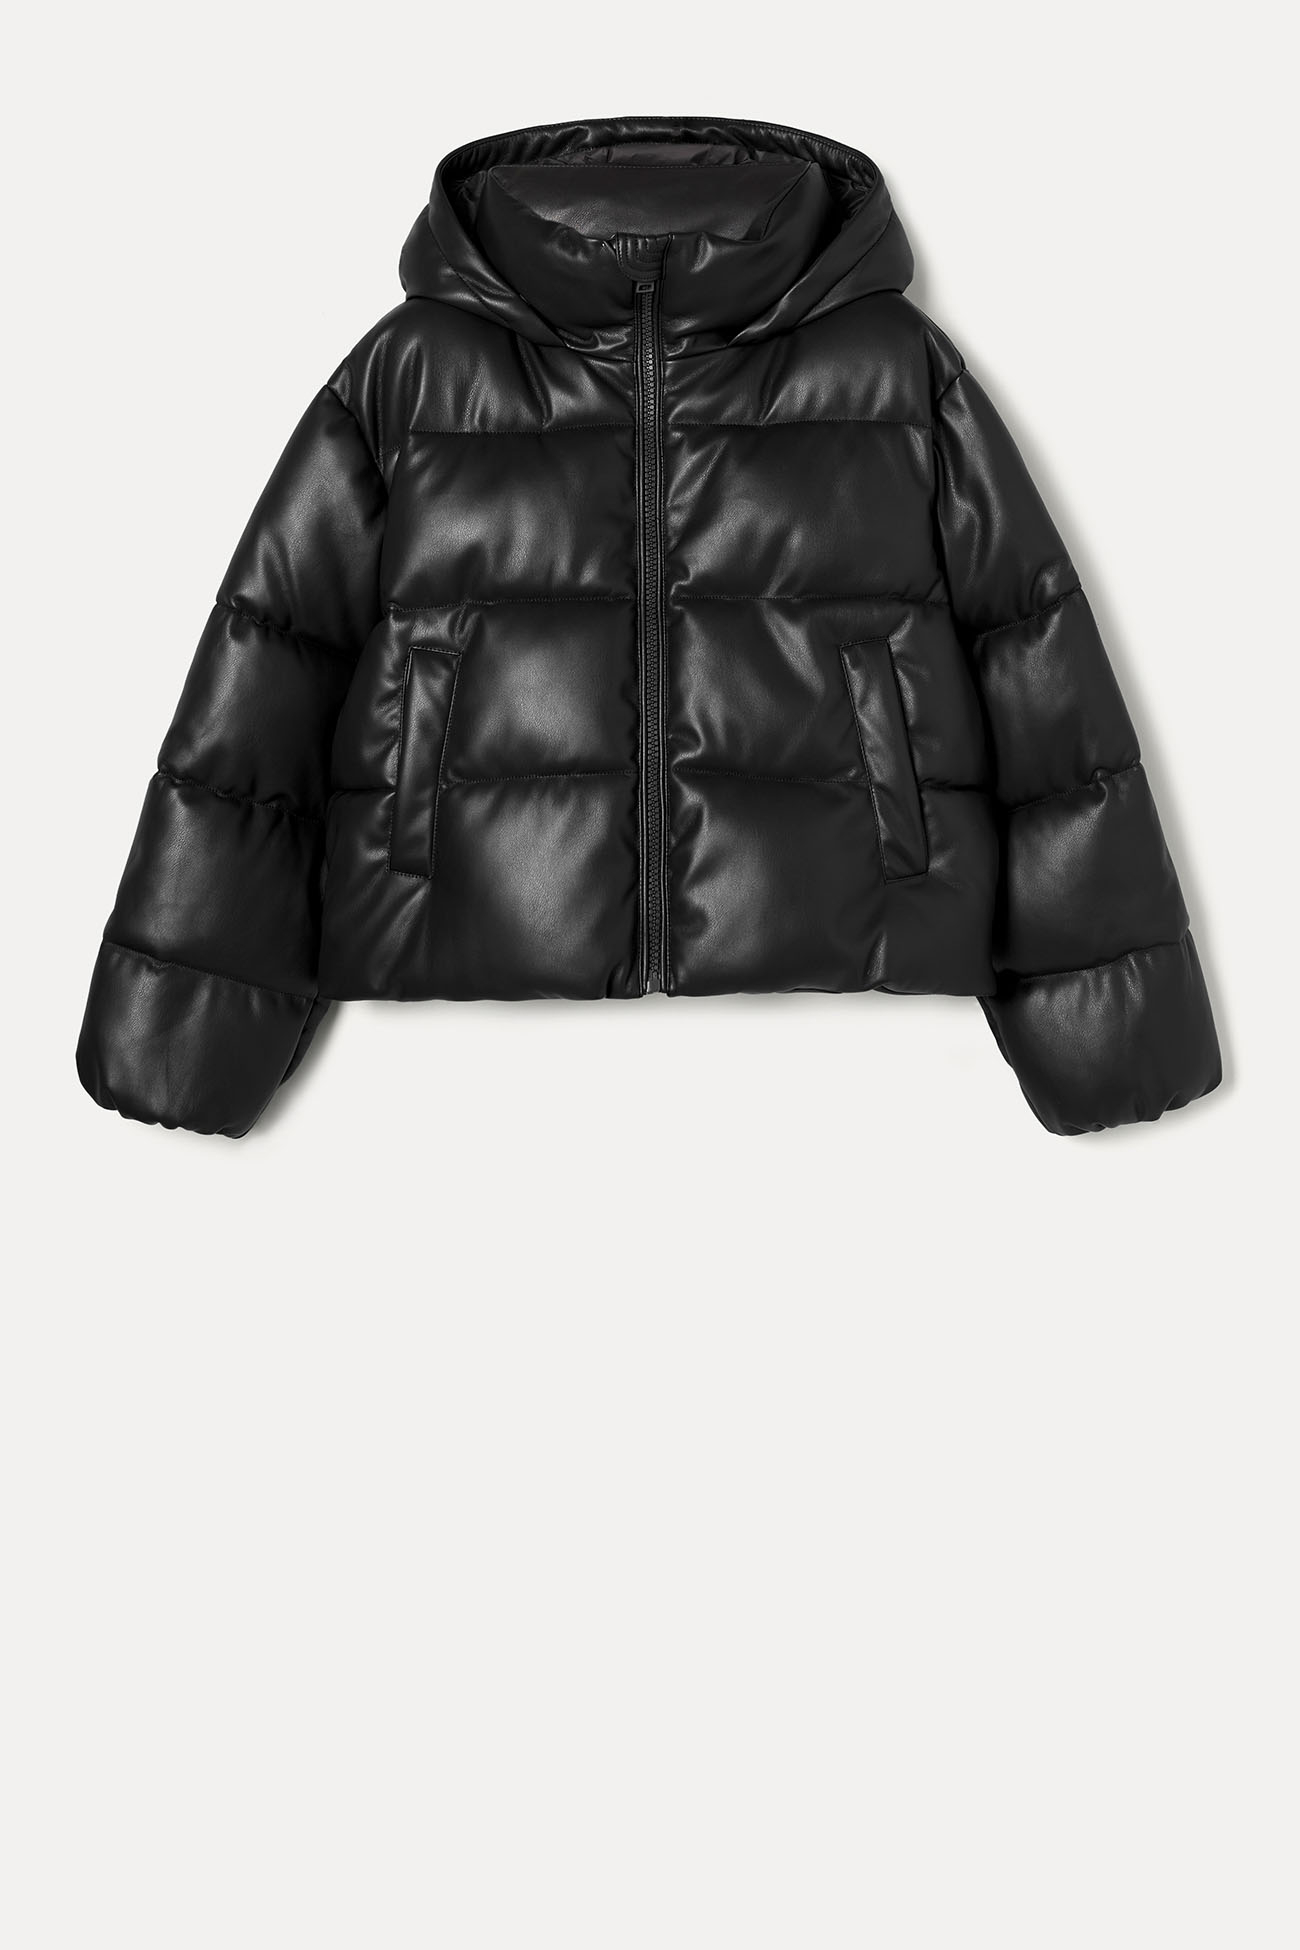 JACKET 9200 MADE IN ECO LEATHER - BLACK - OOF WEAR